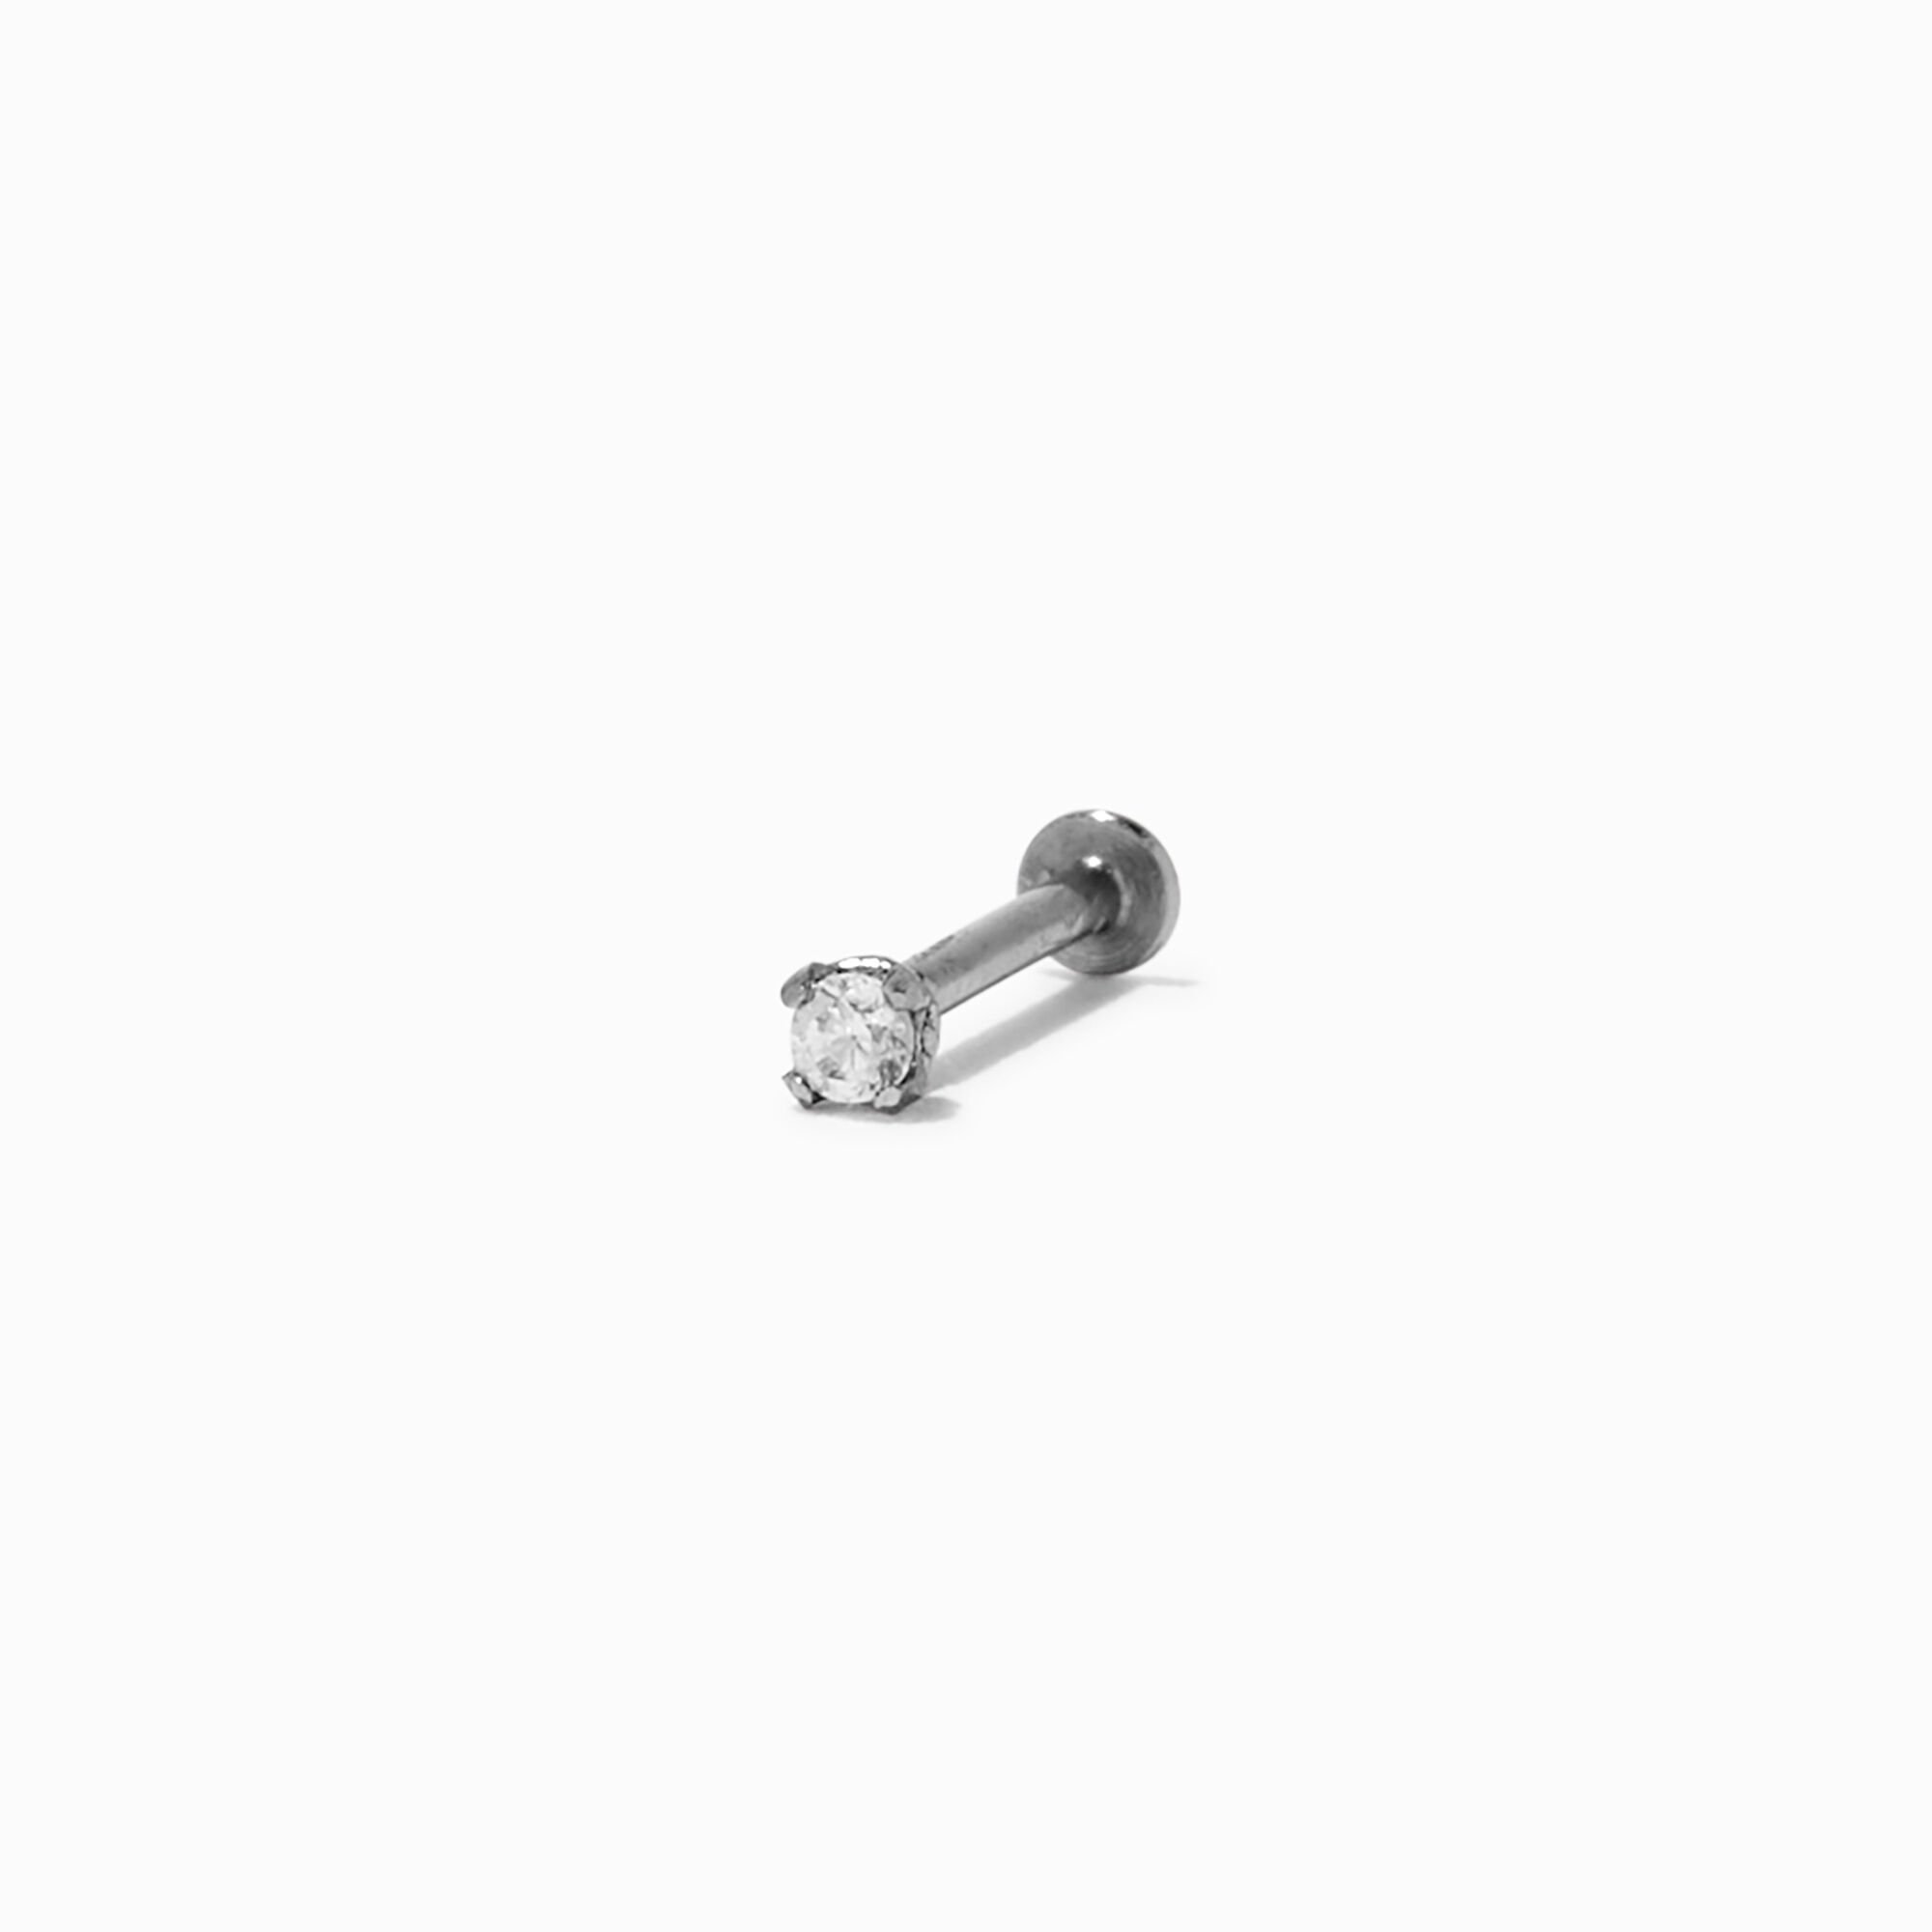 View Claires Tone Stainless Steel Cubic Zirconia 20G Threadless Nose Stud Silver information